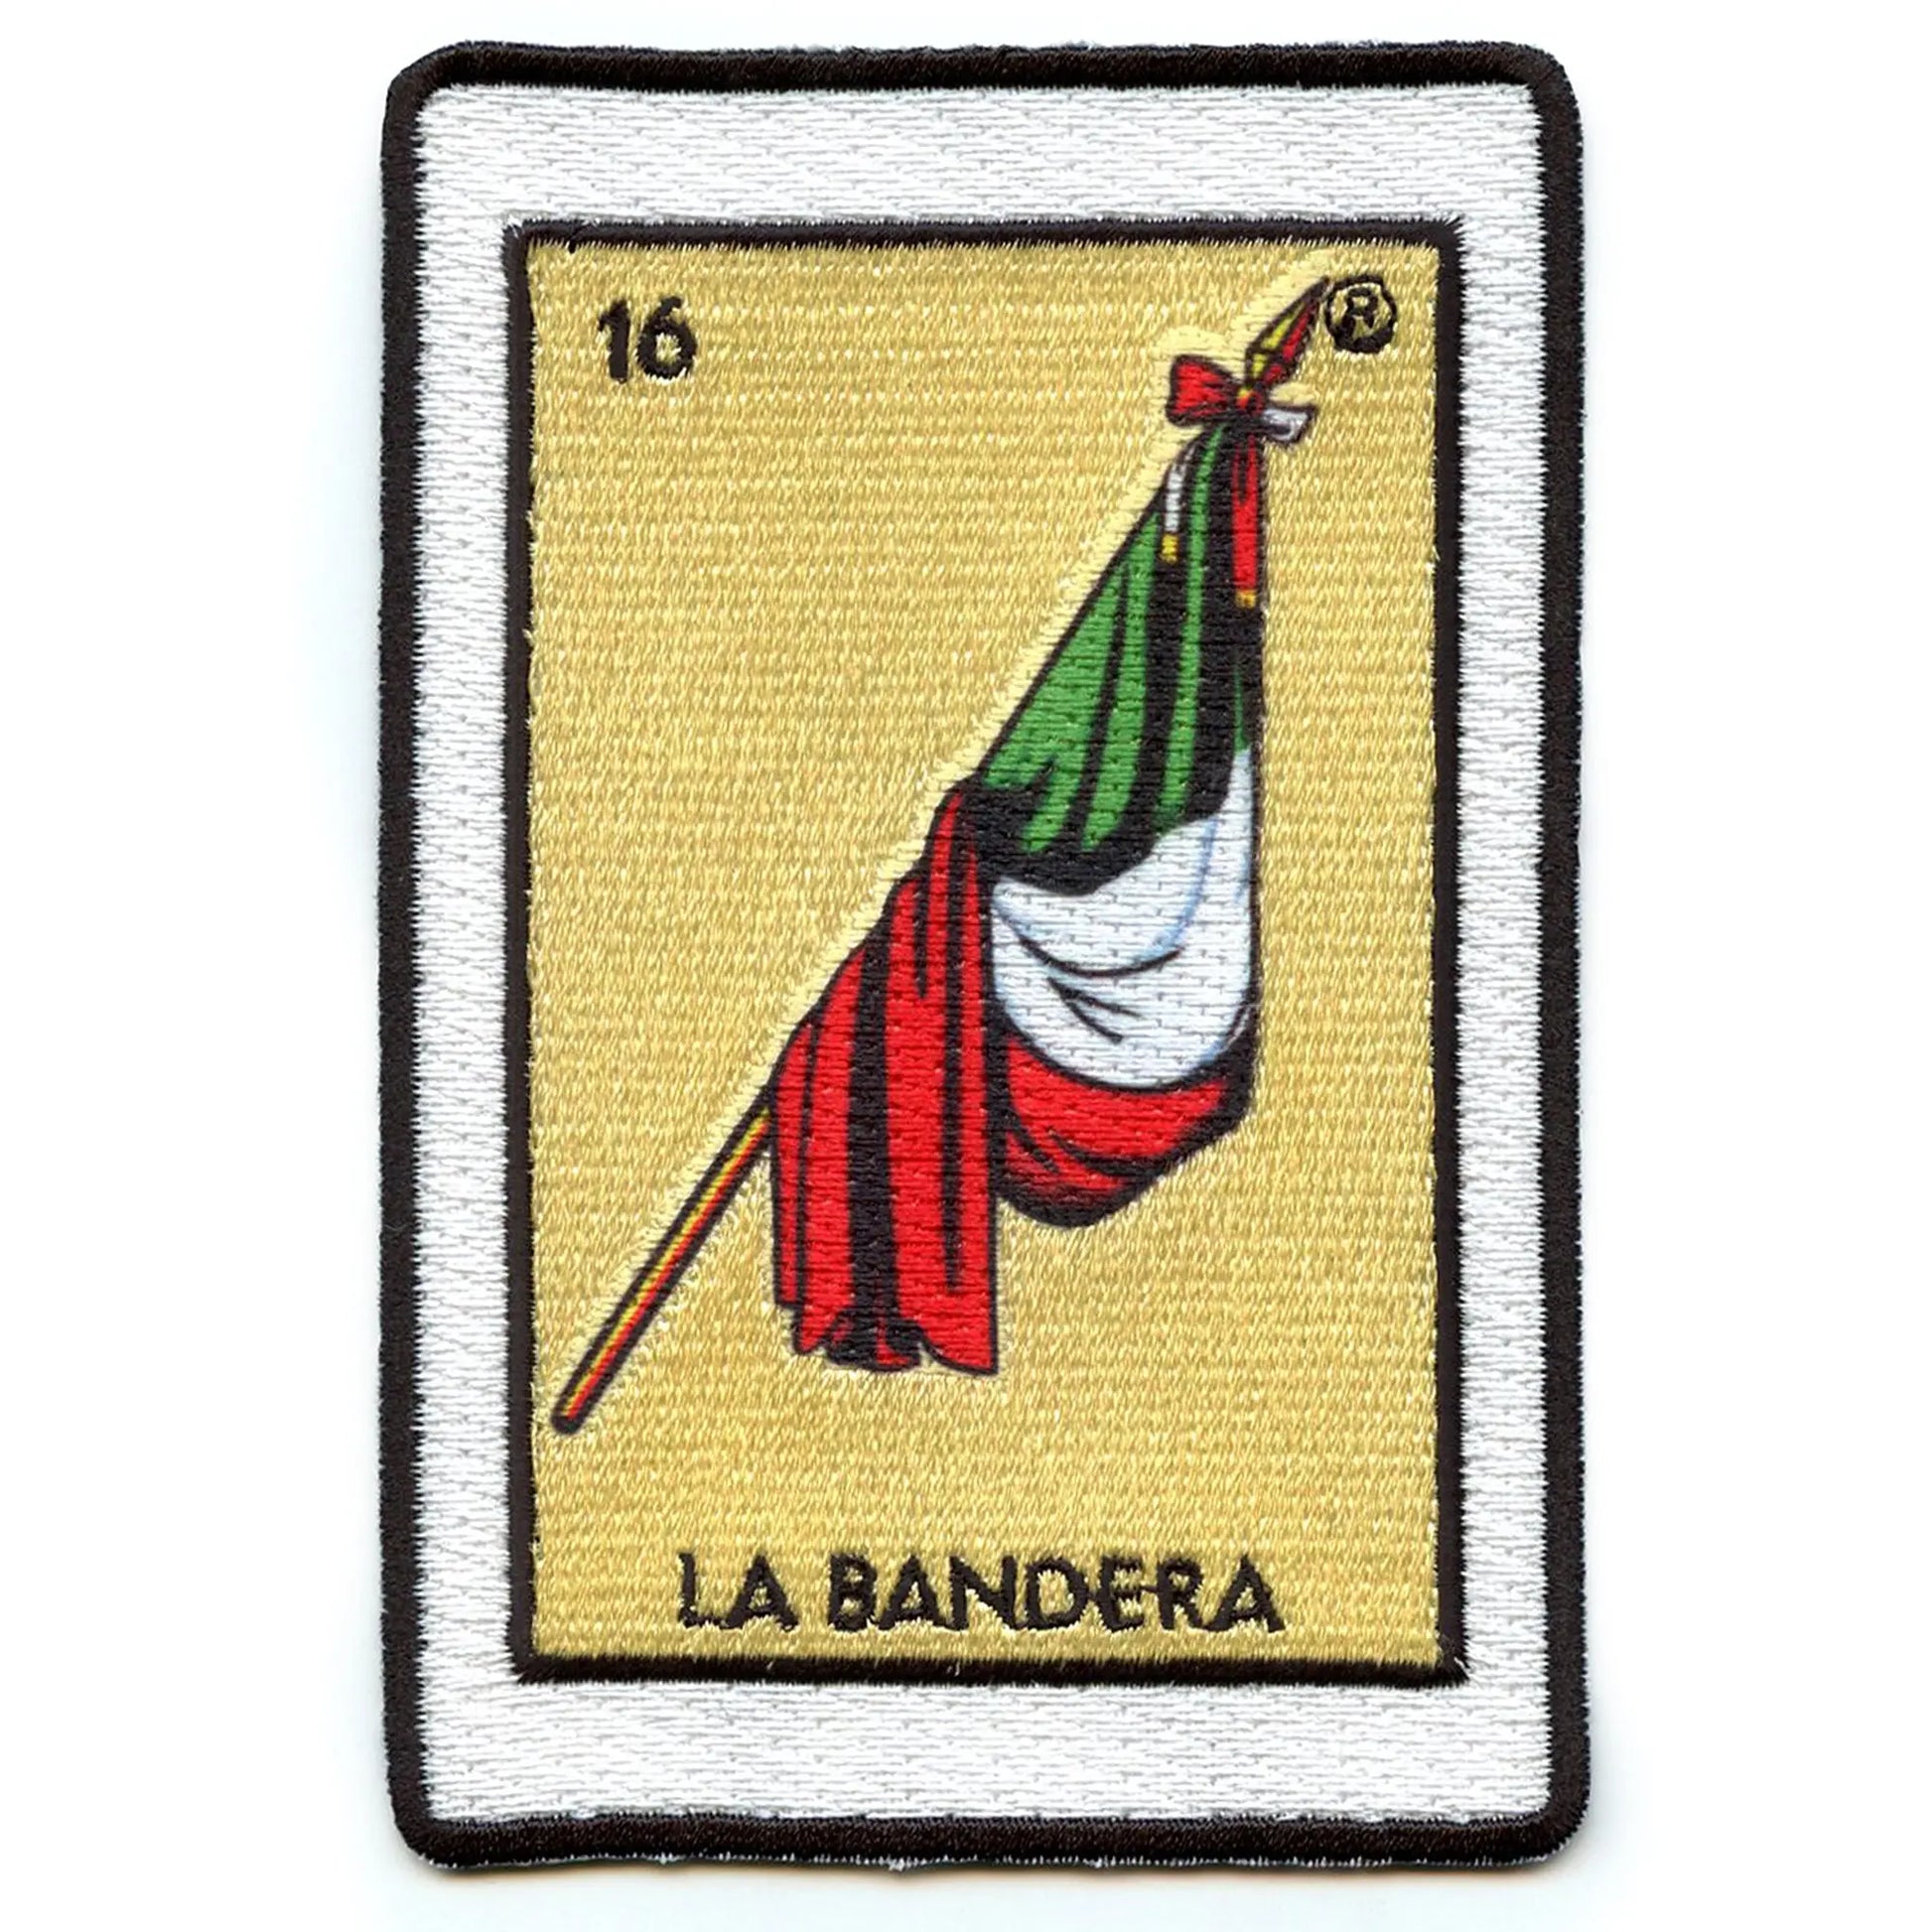 La Bandera 16 Rainbow Patch Mexican Loteria Card Sublimated Embroidery Iron On